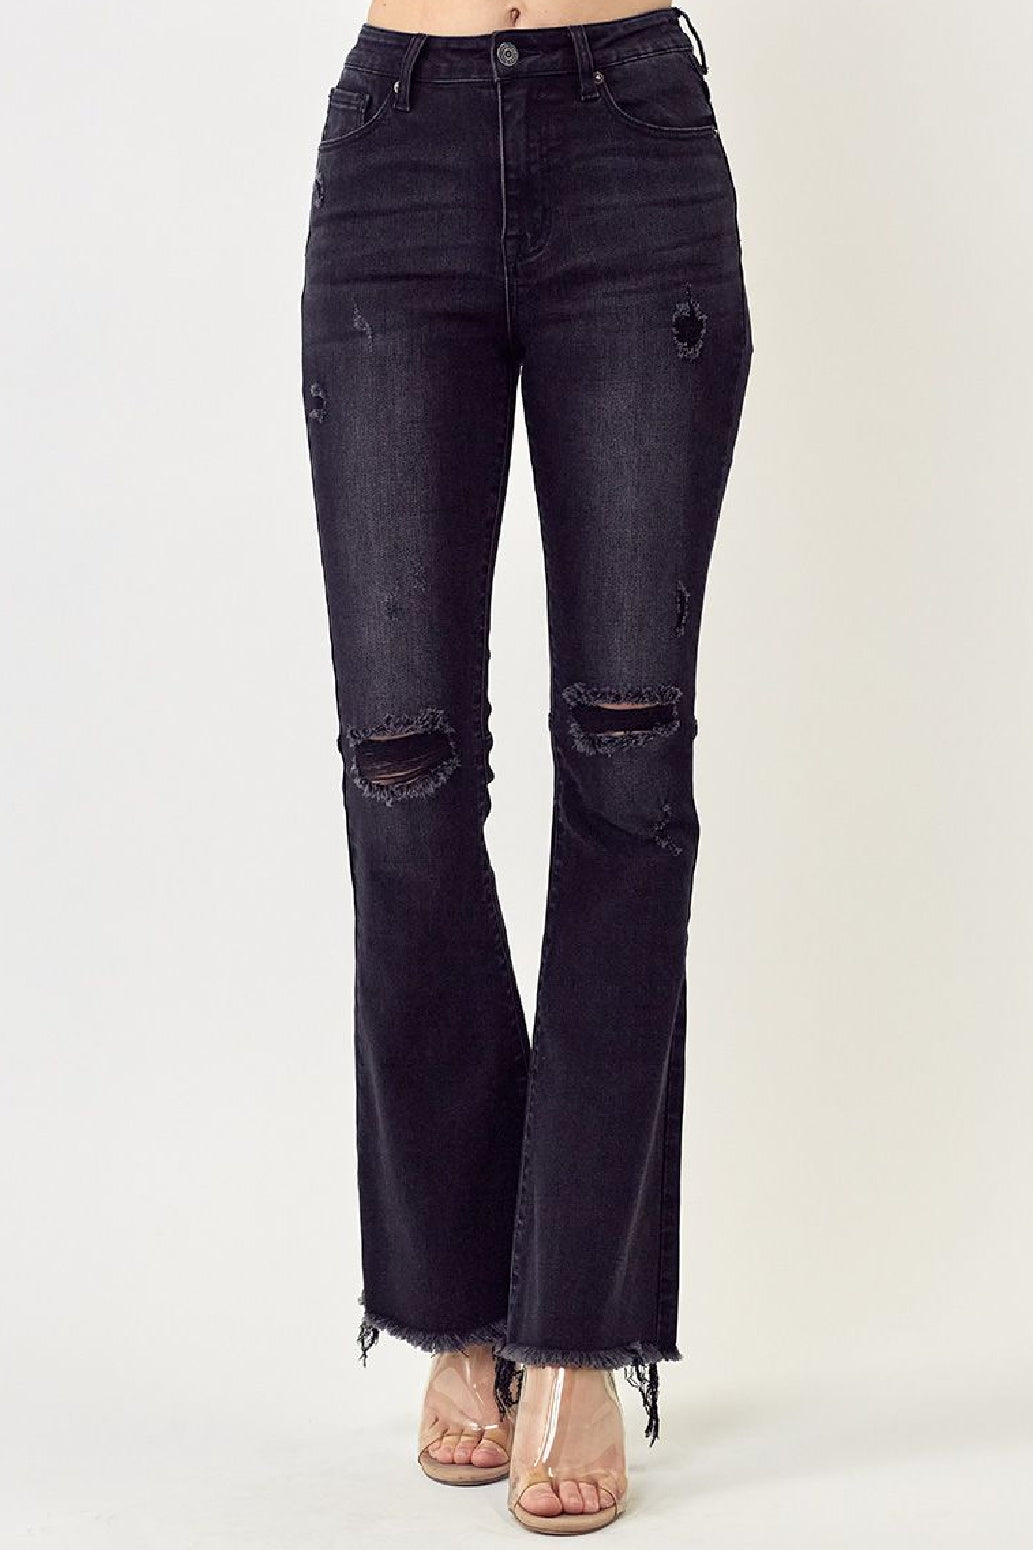 Risen Black Flare Distressed Knee High Waist Jeans Style 1295